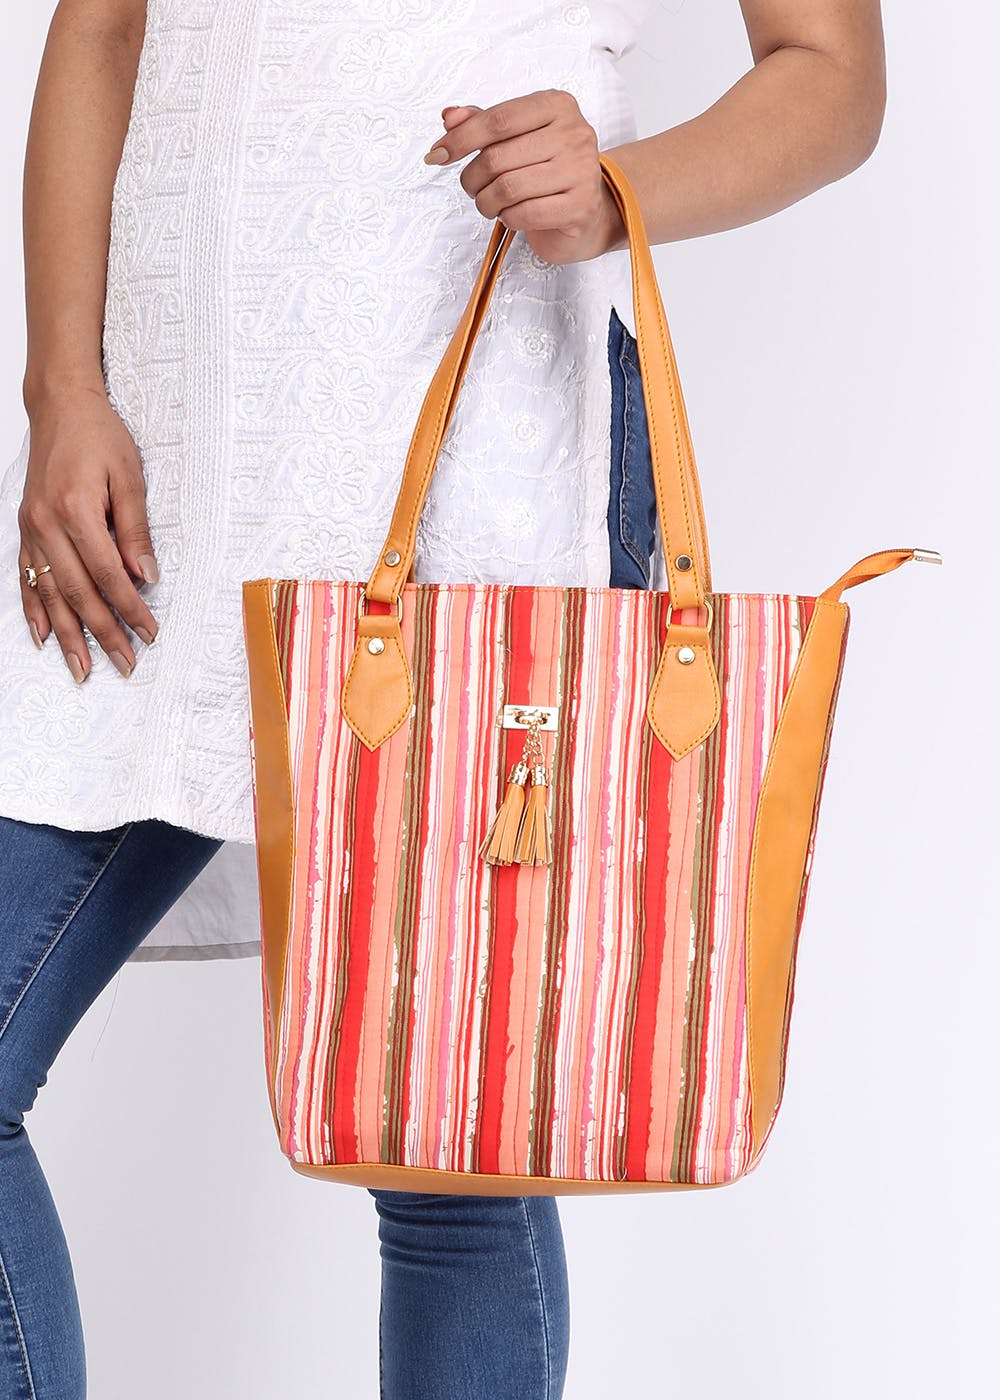 Thirty one 31 tote striped organizer bag purse storage teacher bag purse  stripe | Teacher bags, Purse storage, Purses and bags